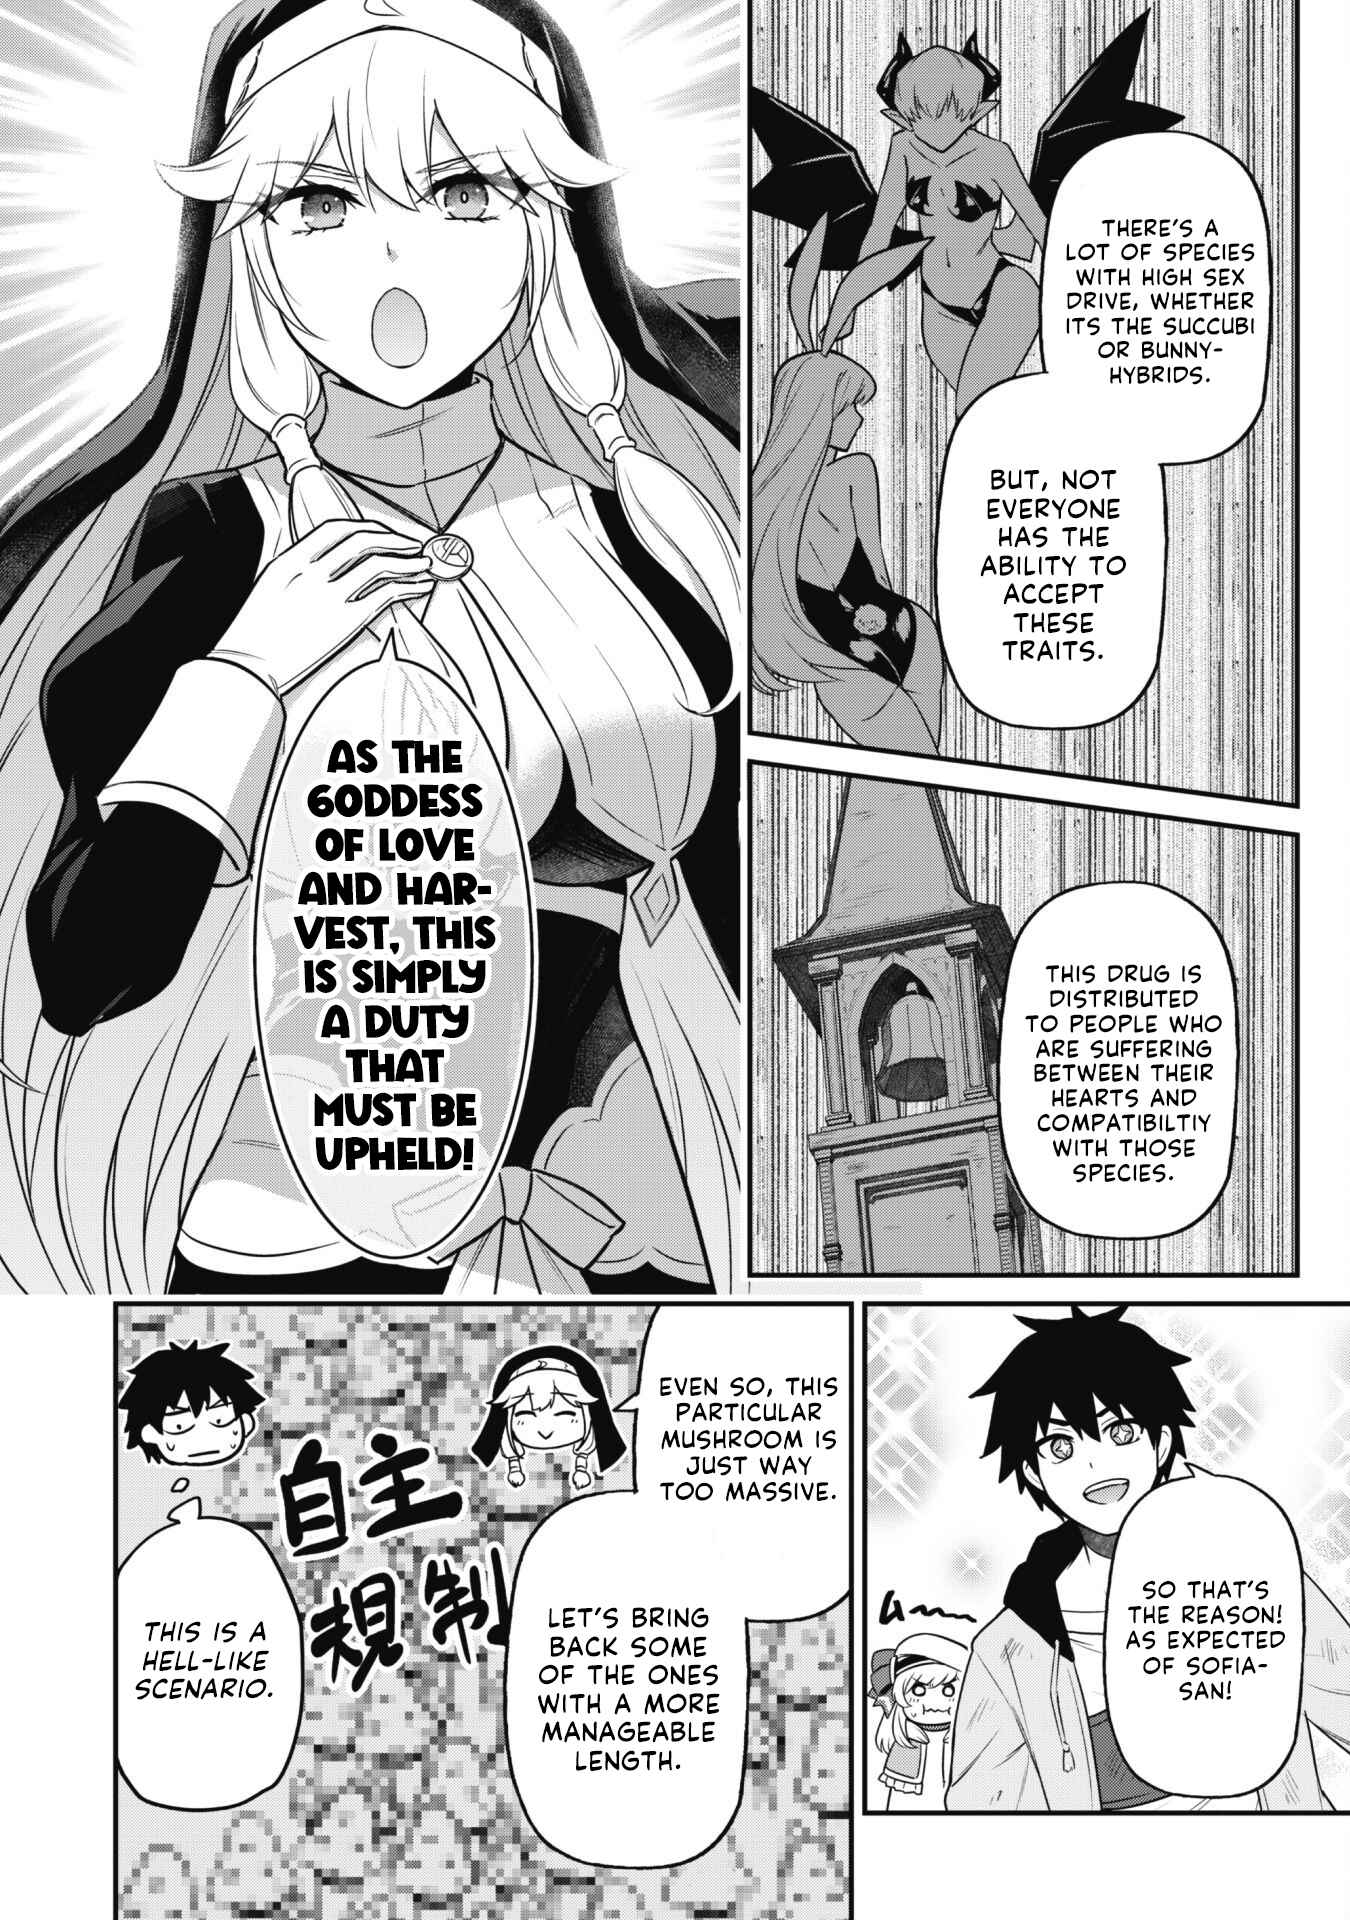 The White Mage Who Joined My Party Is a Circle Crusher, So My Isekai Life Is at Risk of Collapsing Once Again chapter 4 page 22